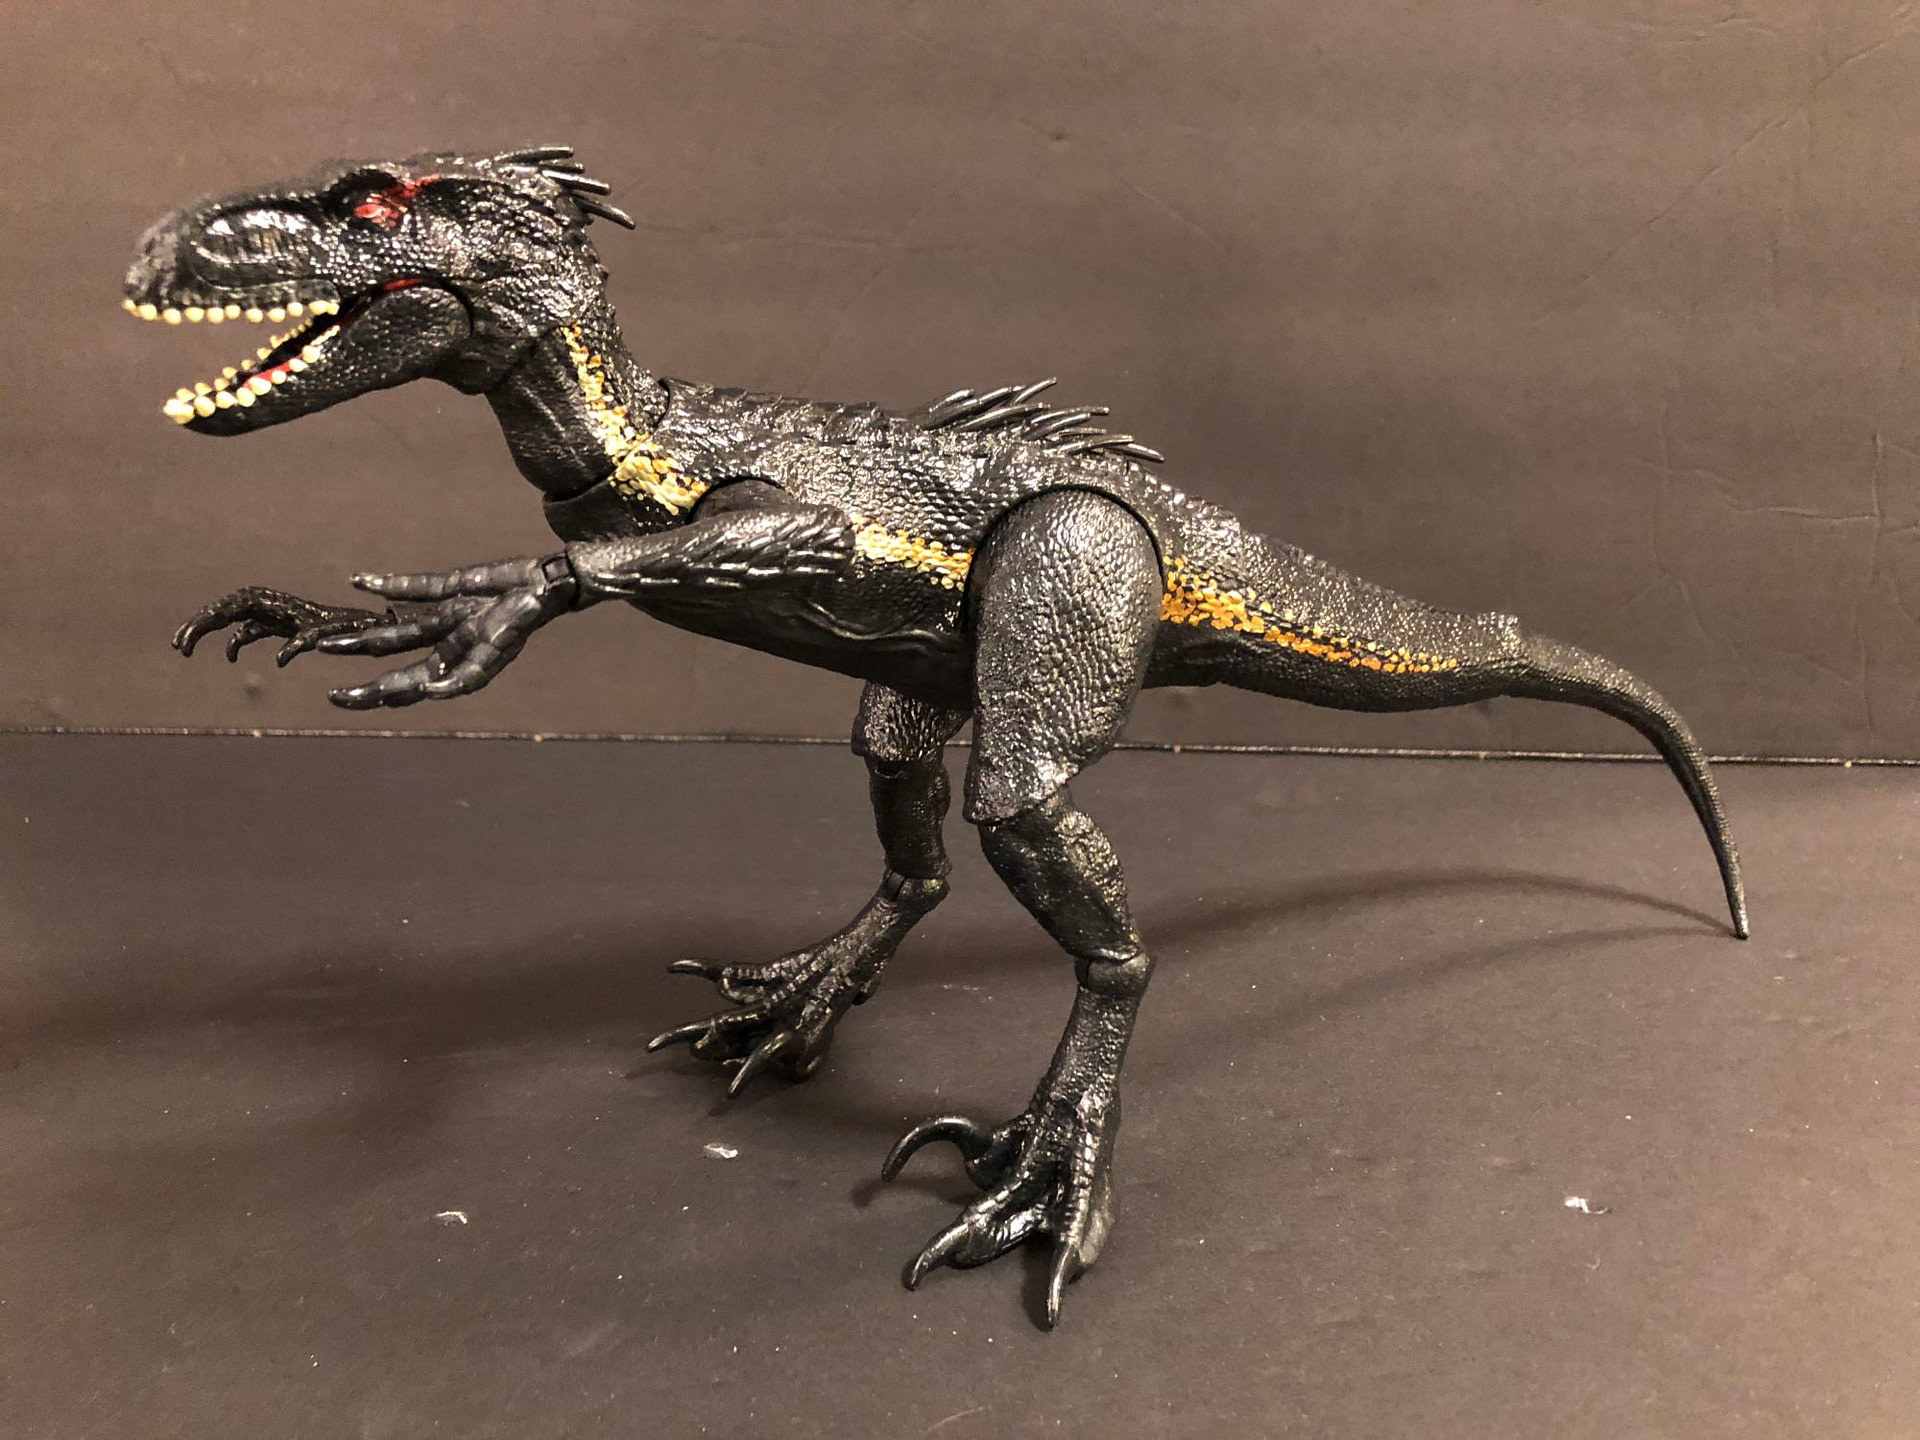 Let's Take a Look at Some Jurassic World Figures! Part 2: Dinos!